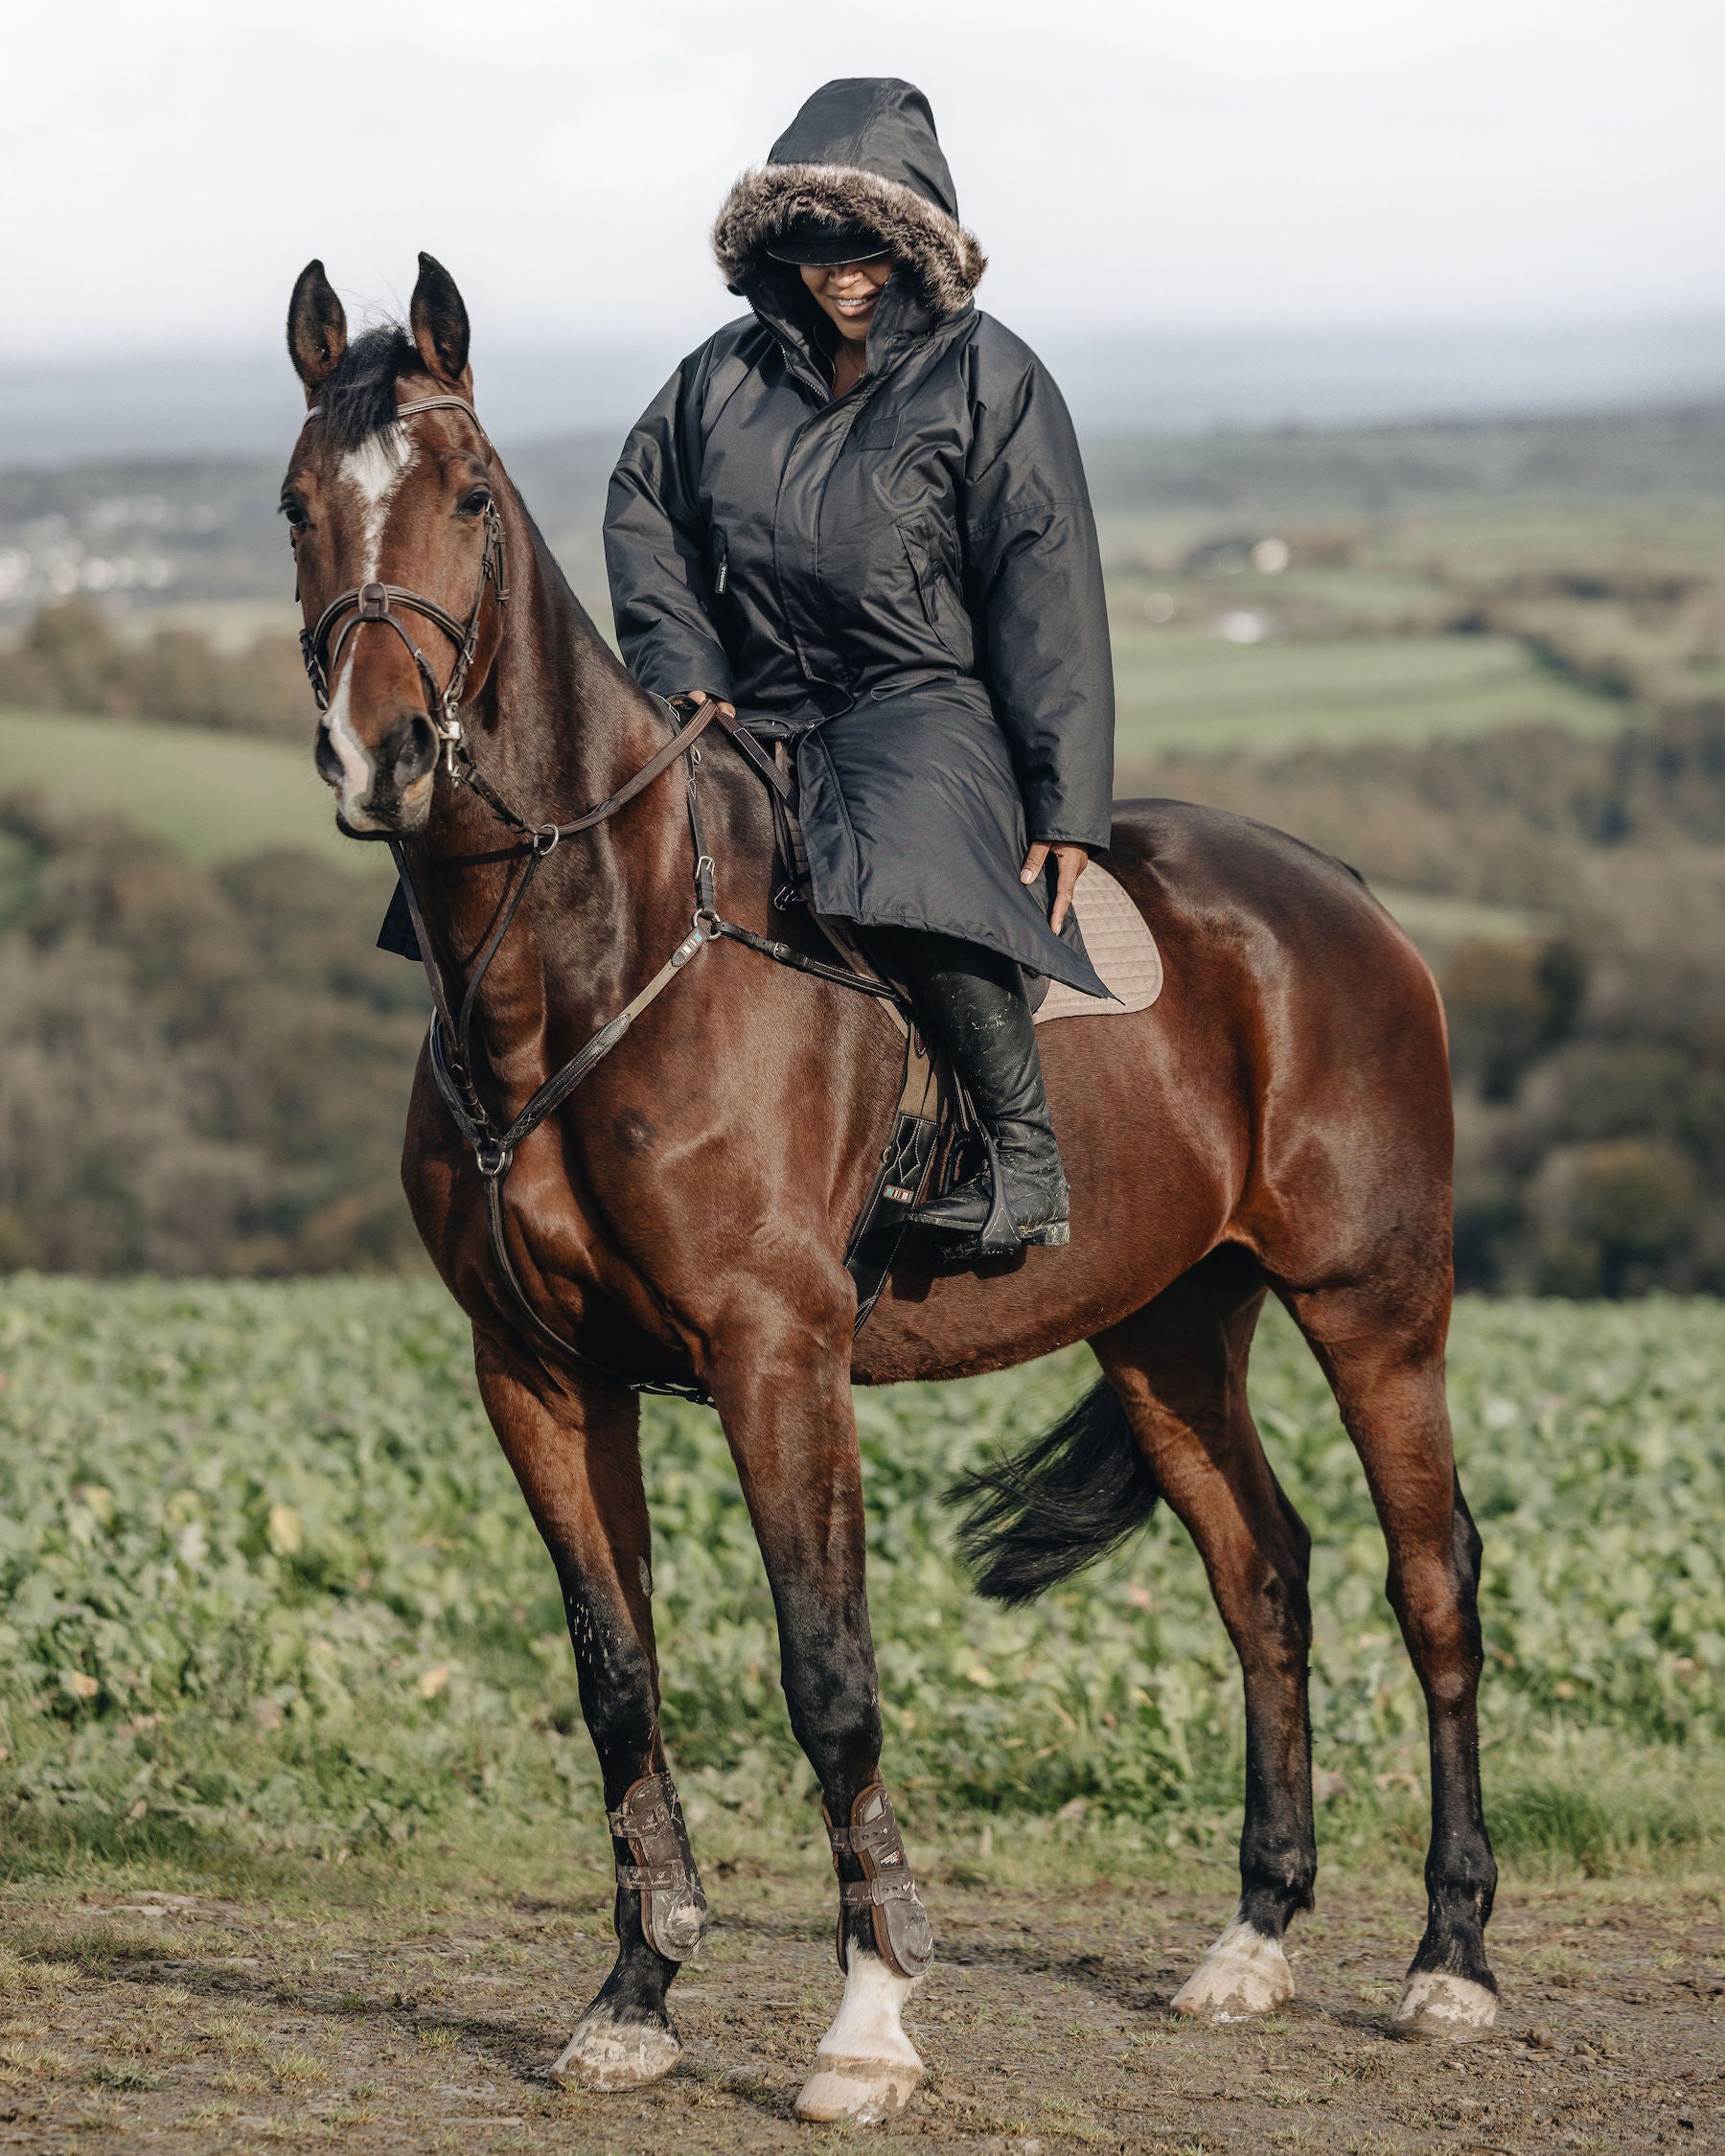 EQUIDRY Black Parka  with fur hood modelled by woman riding Horse cross country 